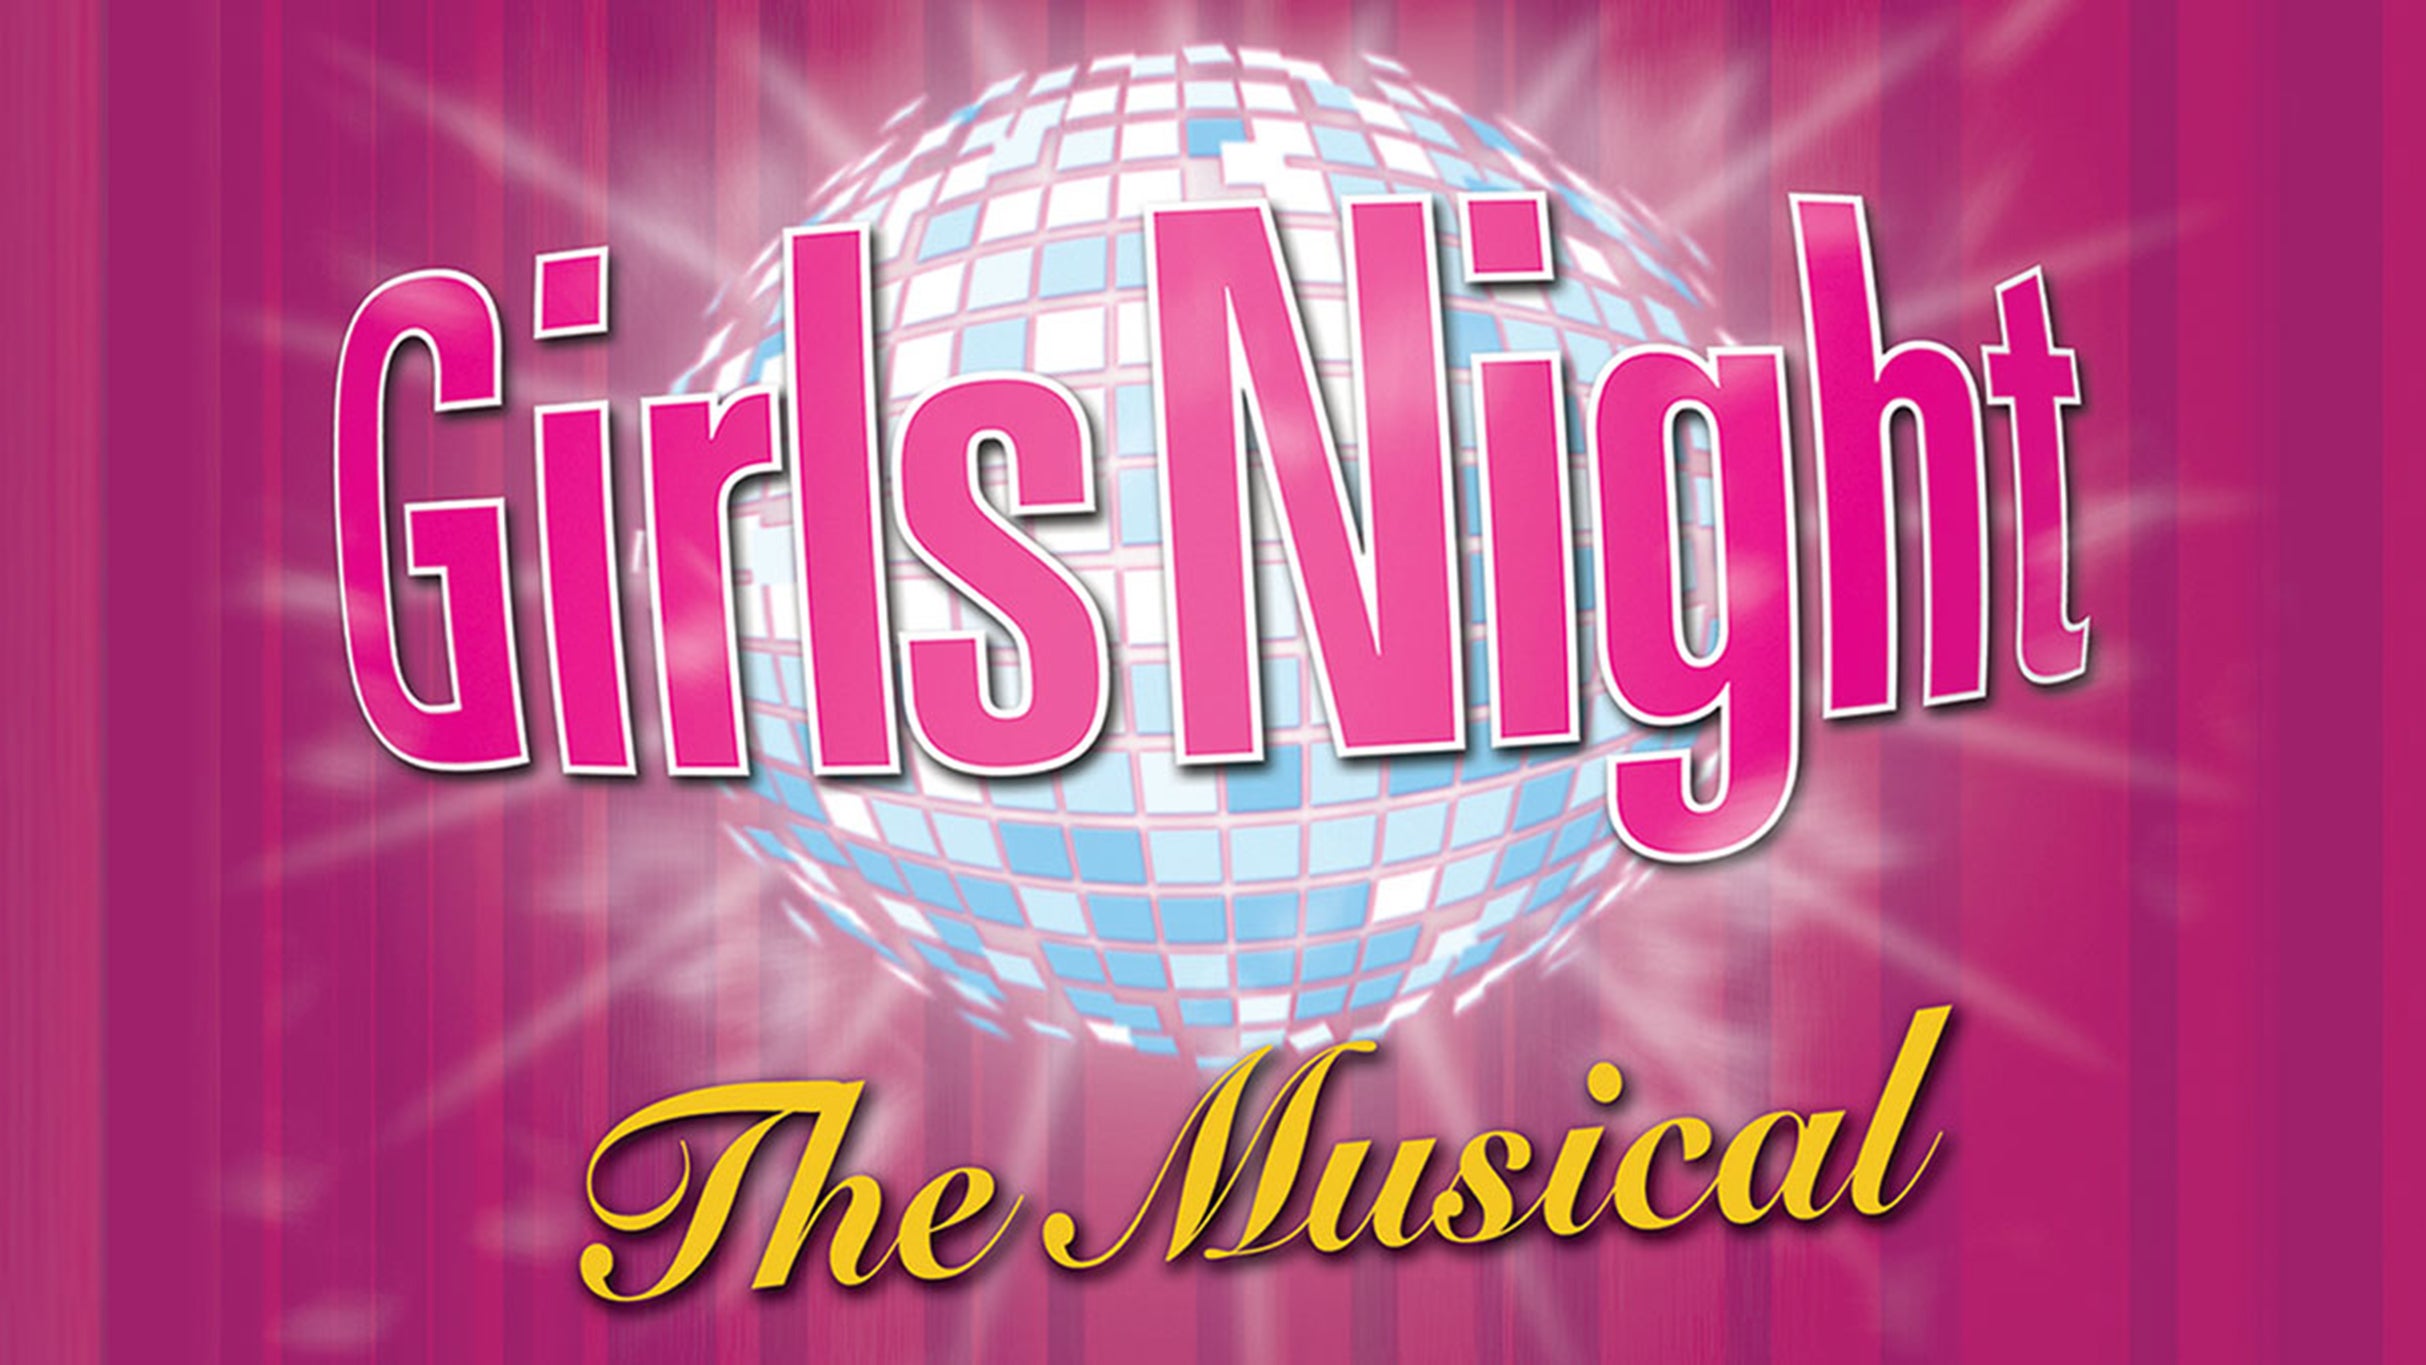 Girls Night: The Musical free presale code for early tickets in Ottumwa